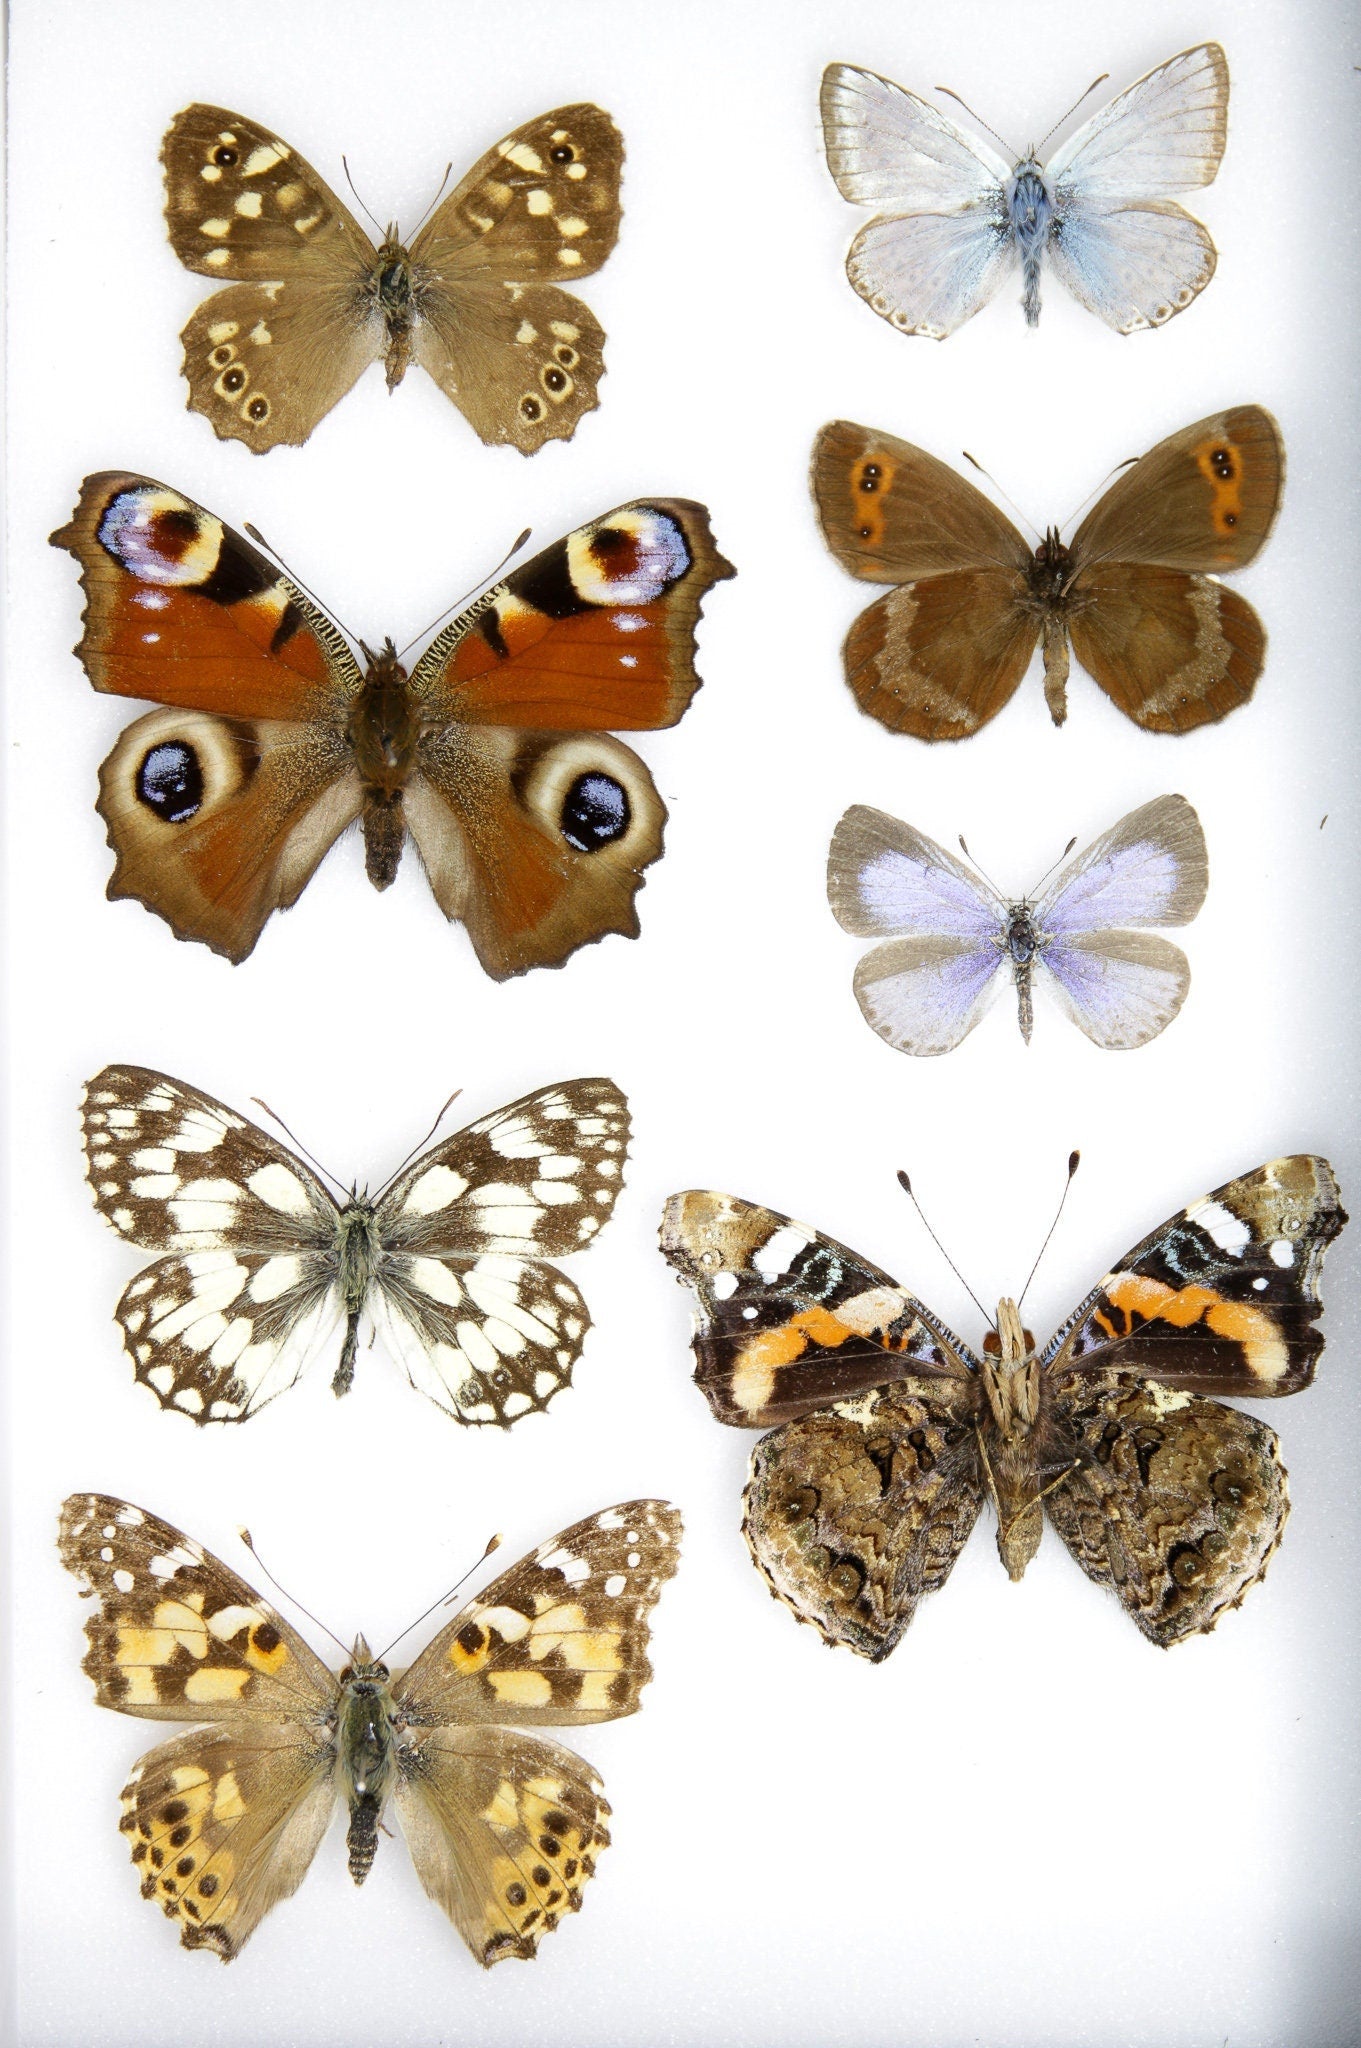 A Collection of Palearctic Butterflies with Scientific Collection Data, A1 Quality, Entomology, Real Lepidoptera Specimens #SE16